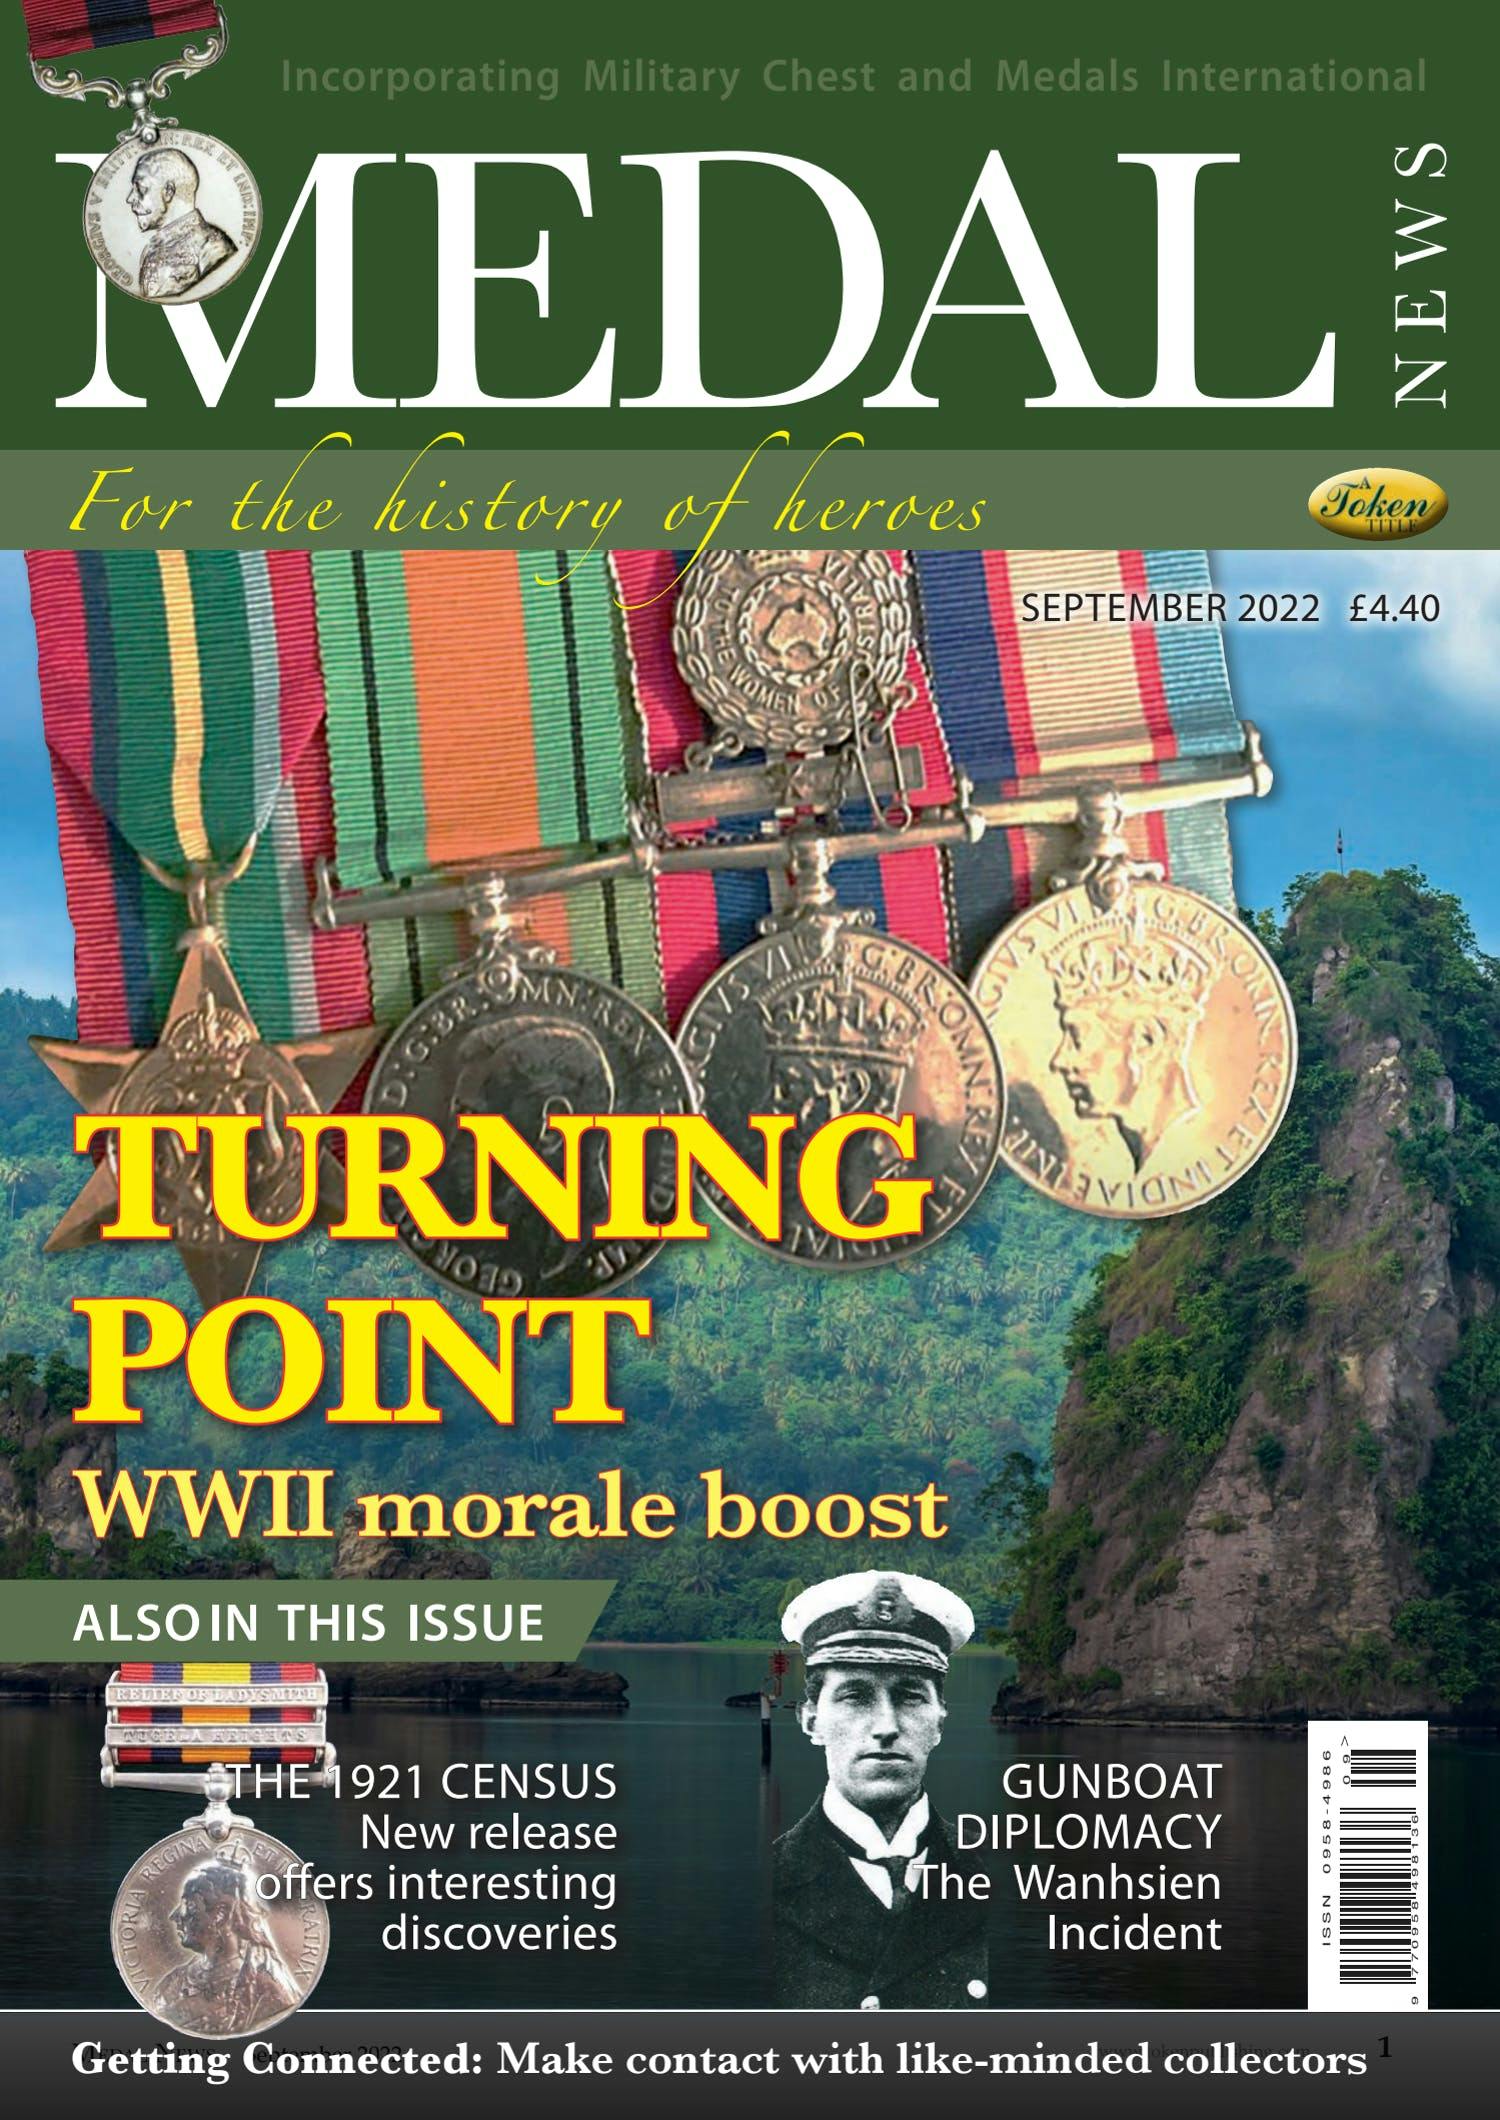 The front cover of Medal News, September 2022 - Volume 60, Number 8